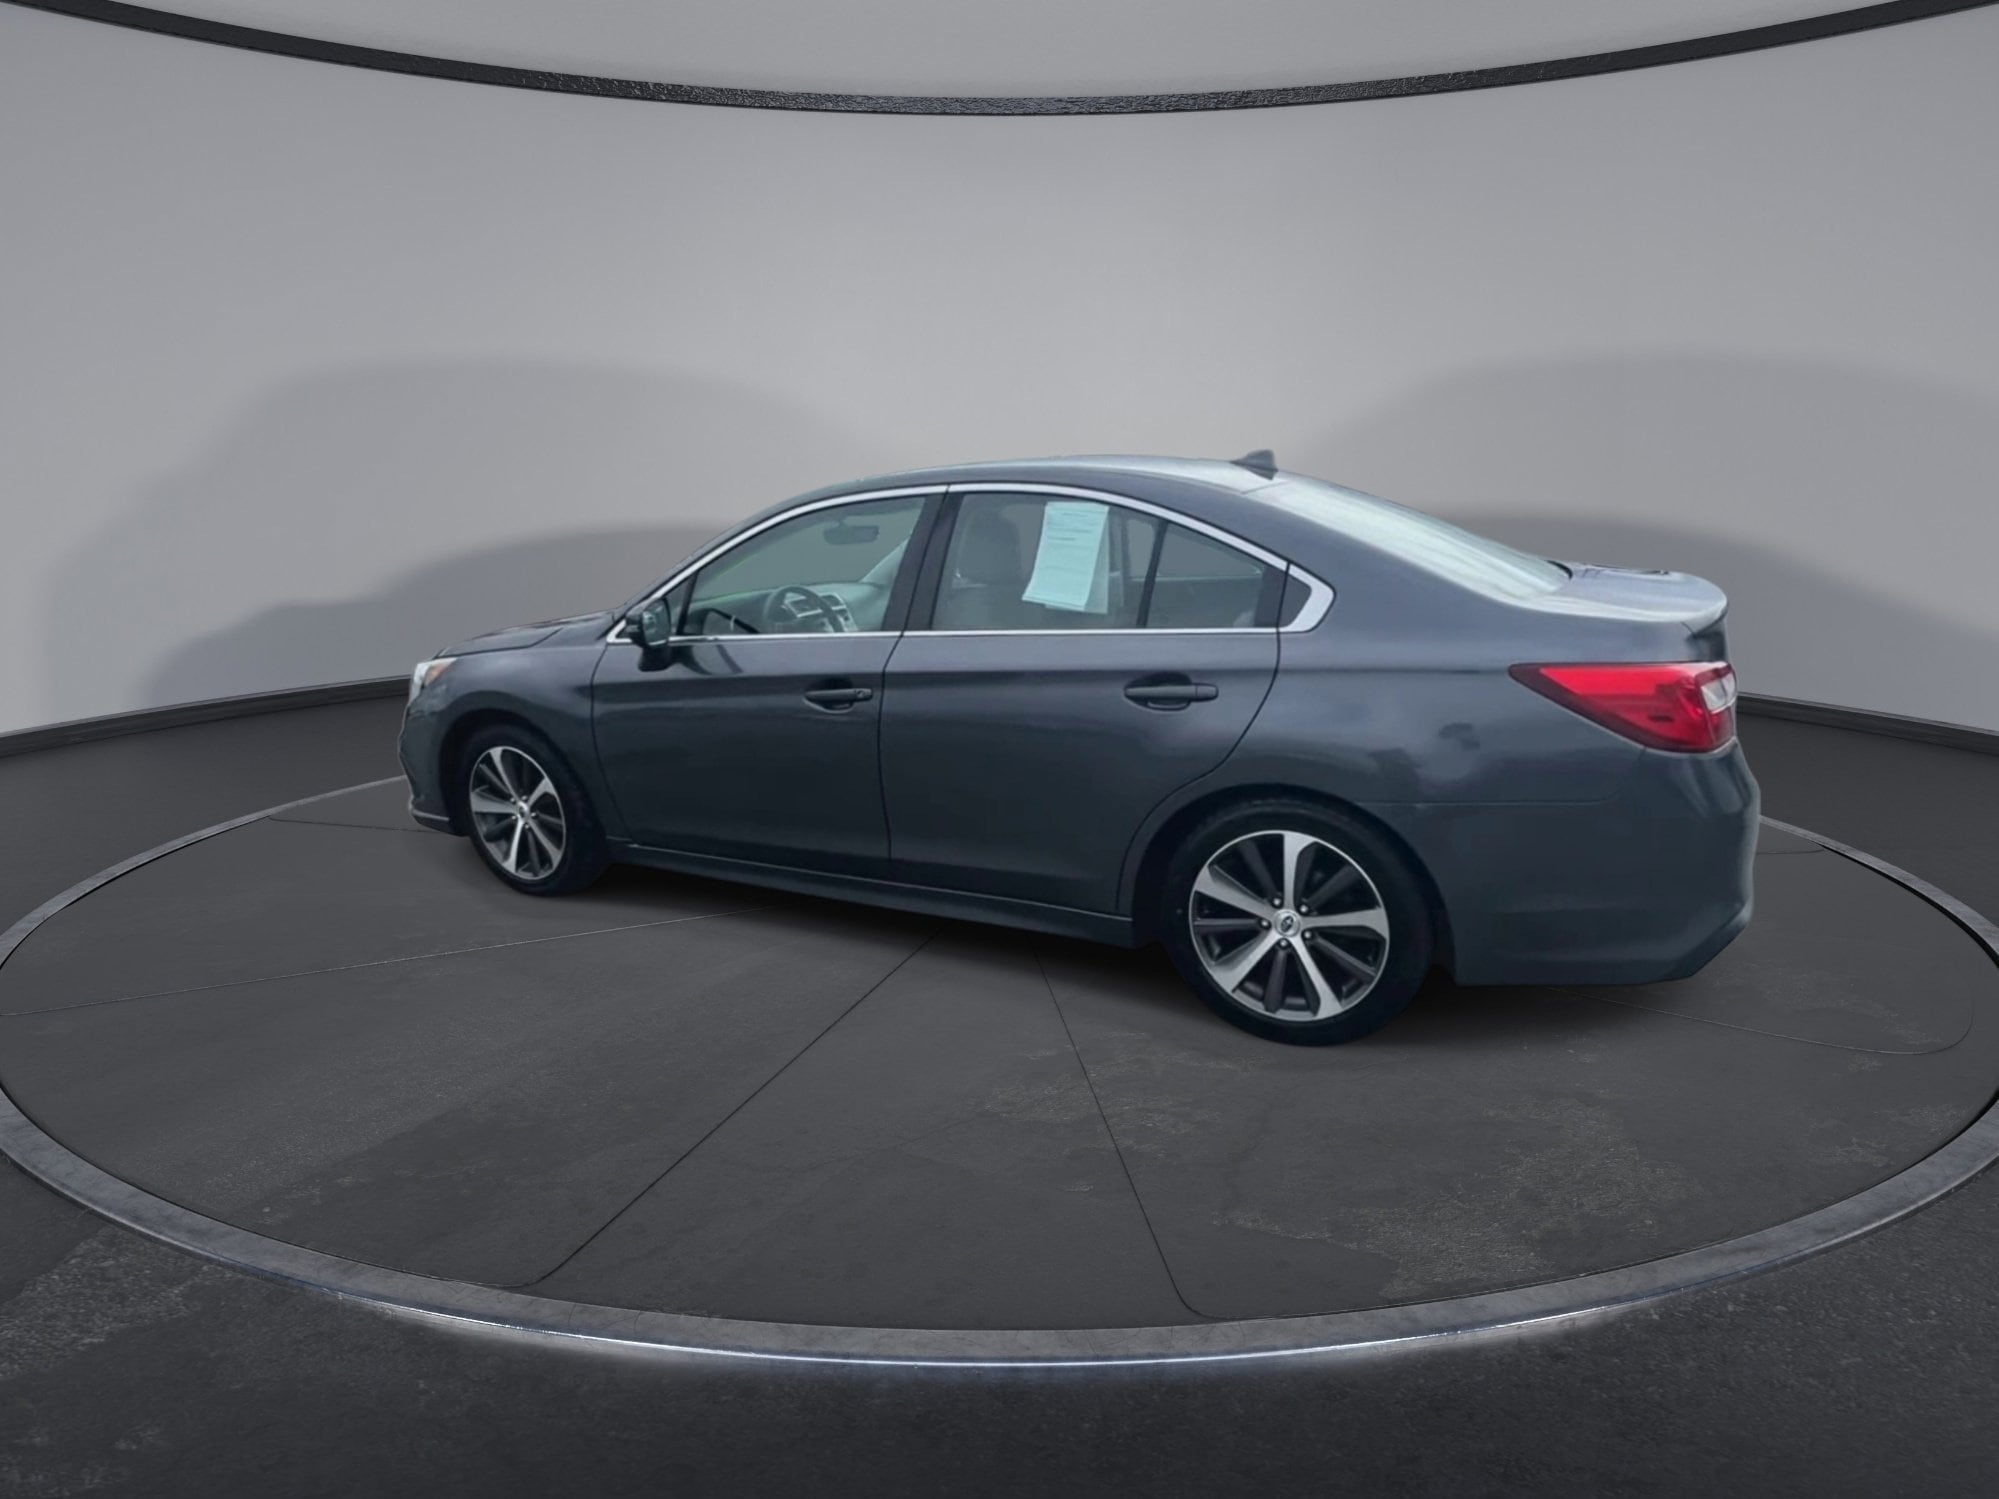 Used 2019 Subaru Legacy Limited with VIN 4S3BNAN63K3008947 for sale in Berlin, VT